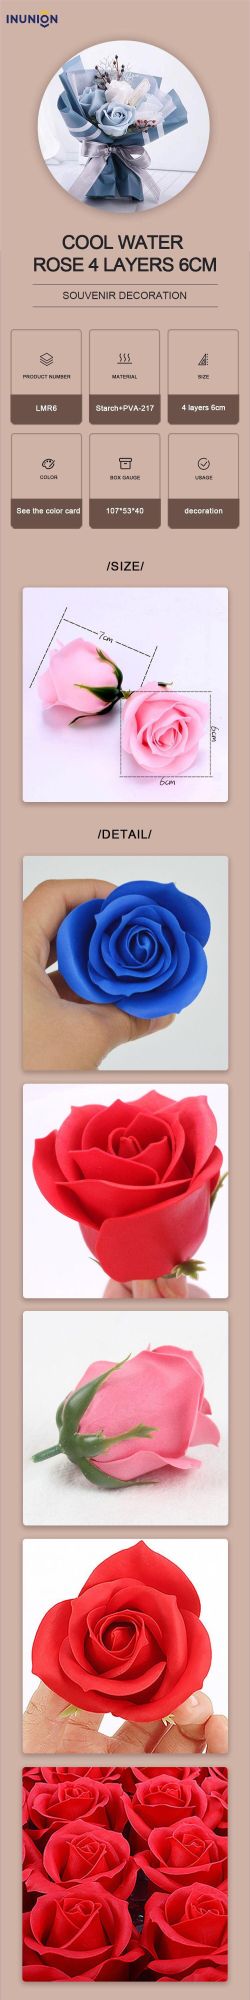 Romantic Hot-Selling Artificial Soap Flower Colorful Single Soap Rose Flower